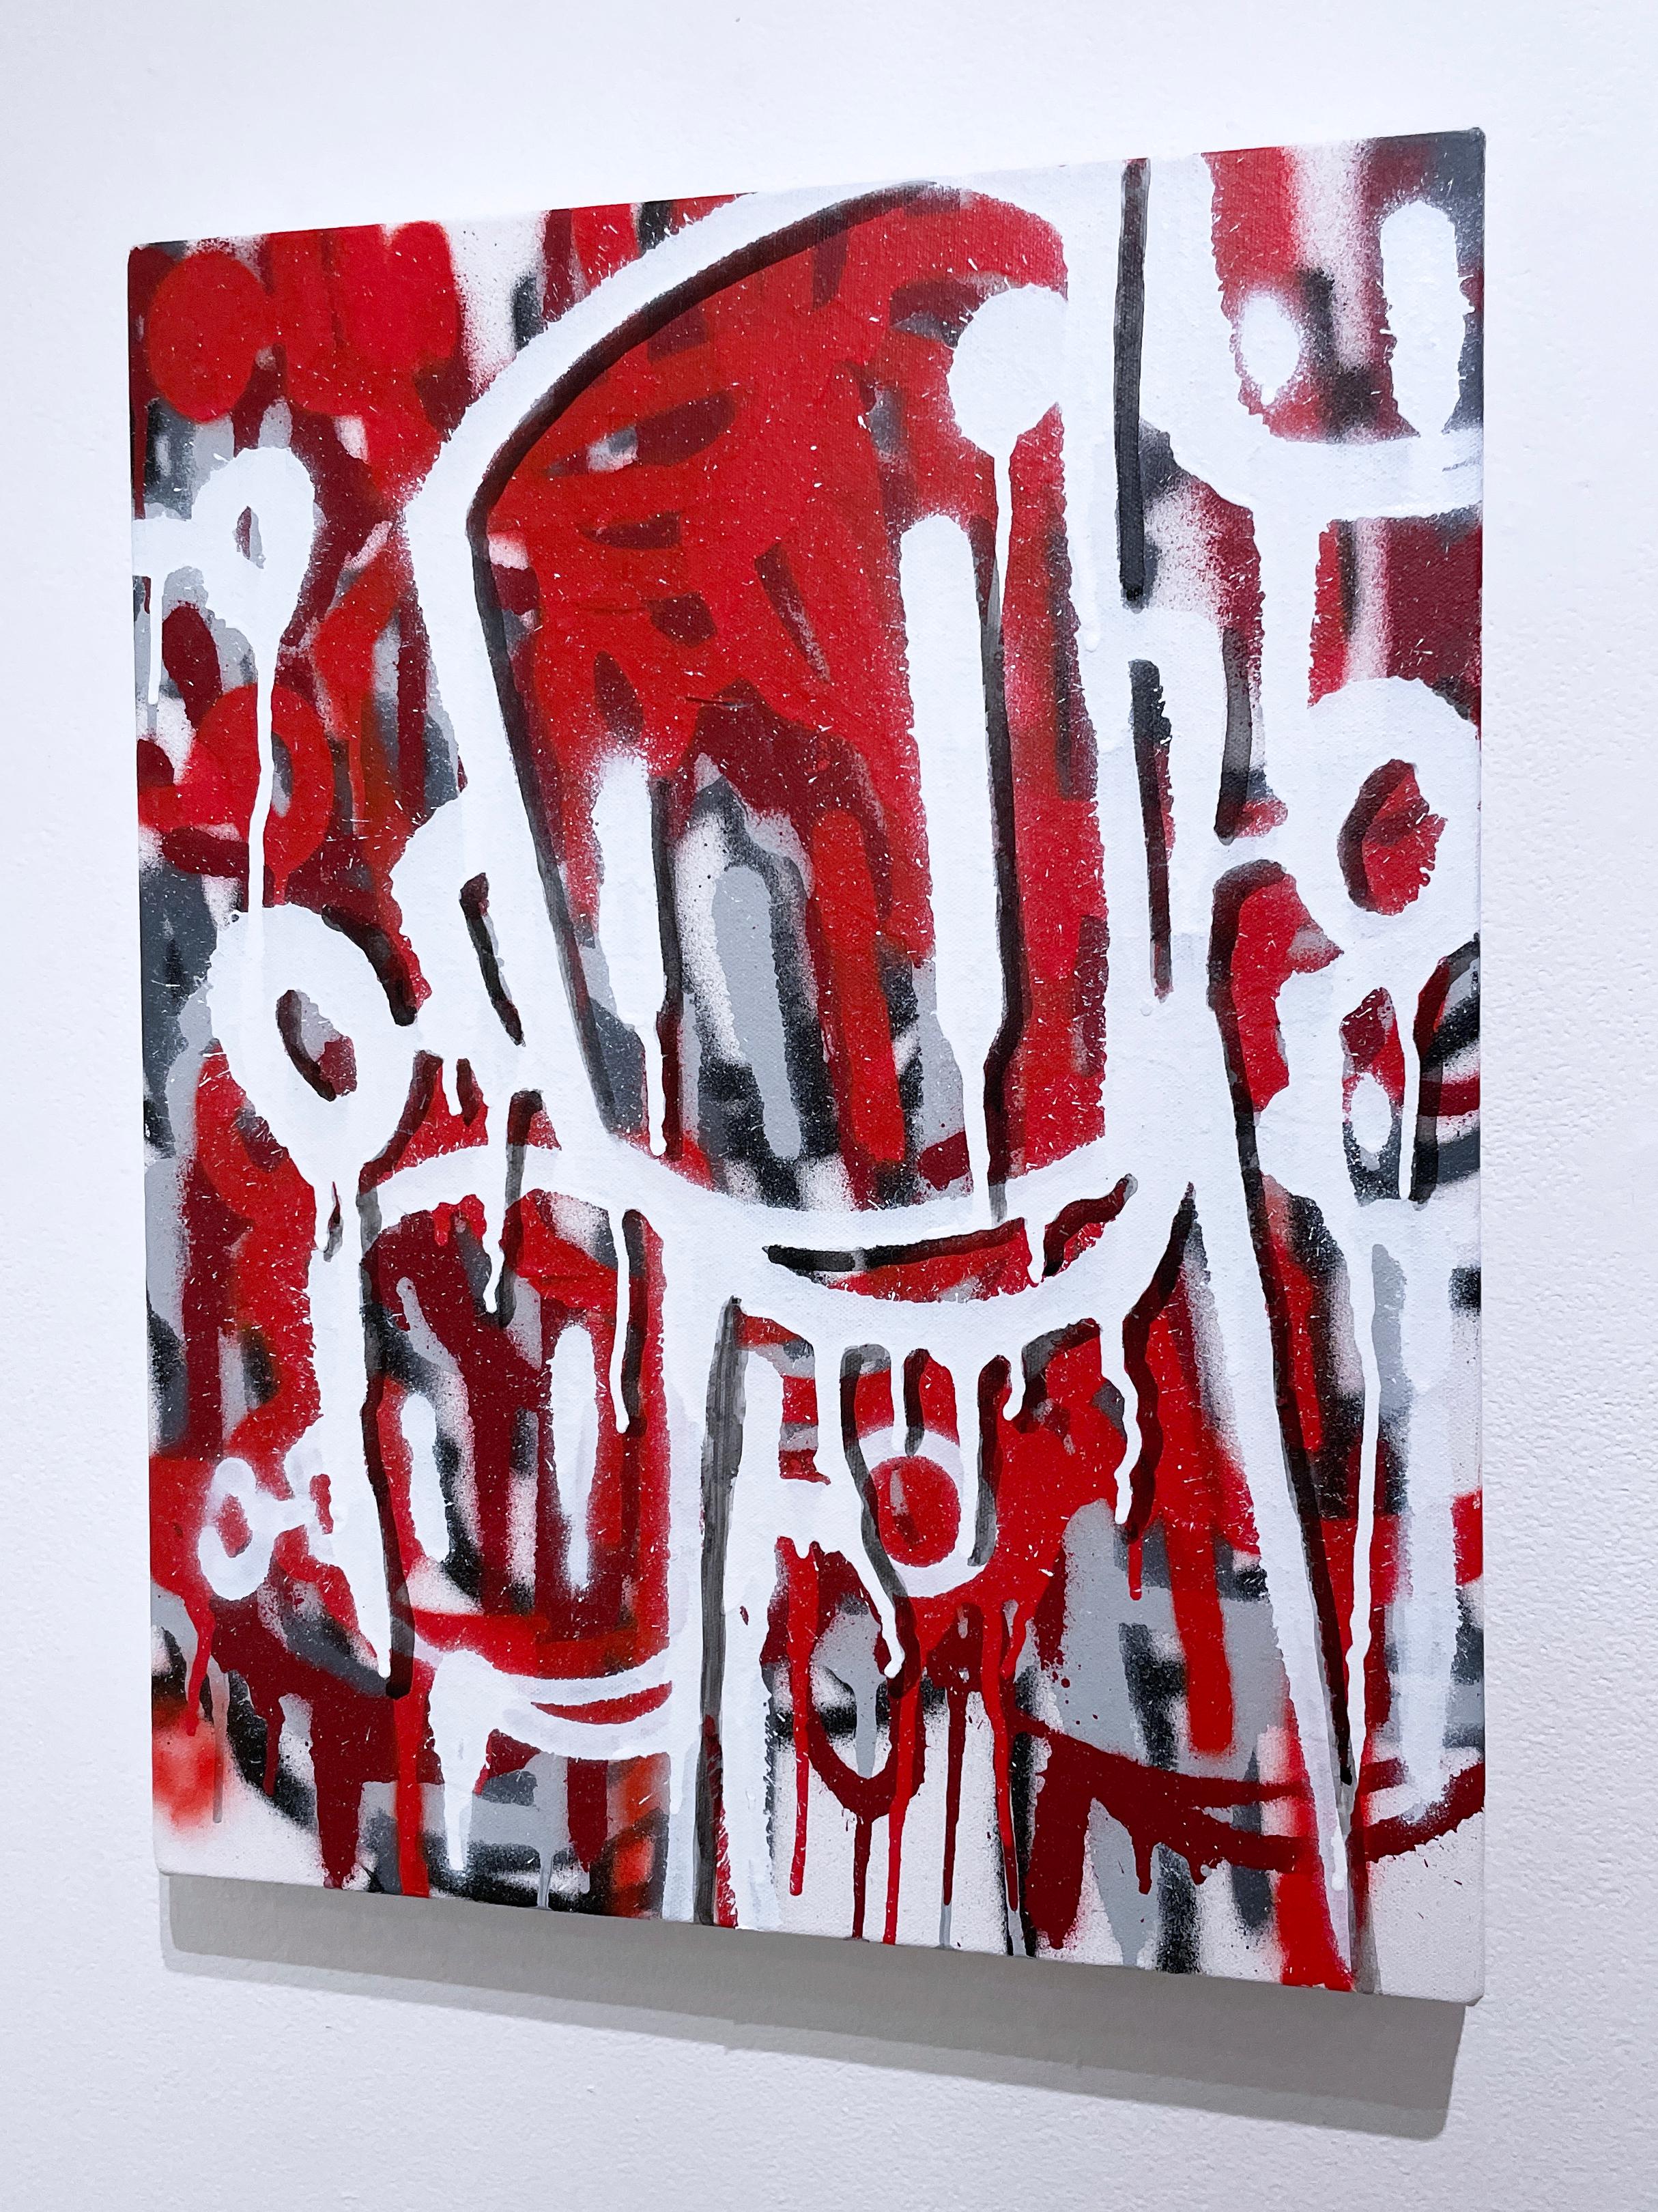 Memories or Ghosts by Chris RWK, street art, graffiti, spray paint, red & white For Sale 2